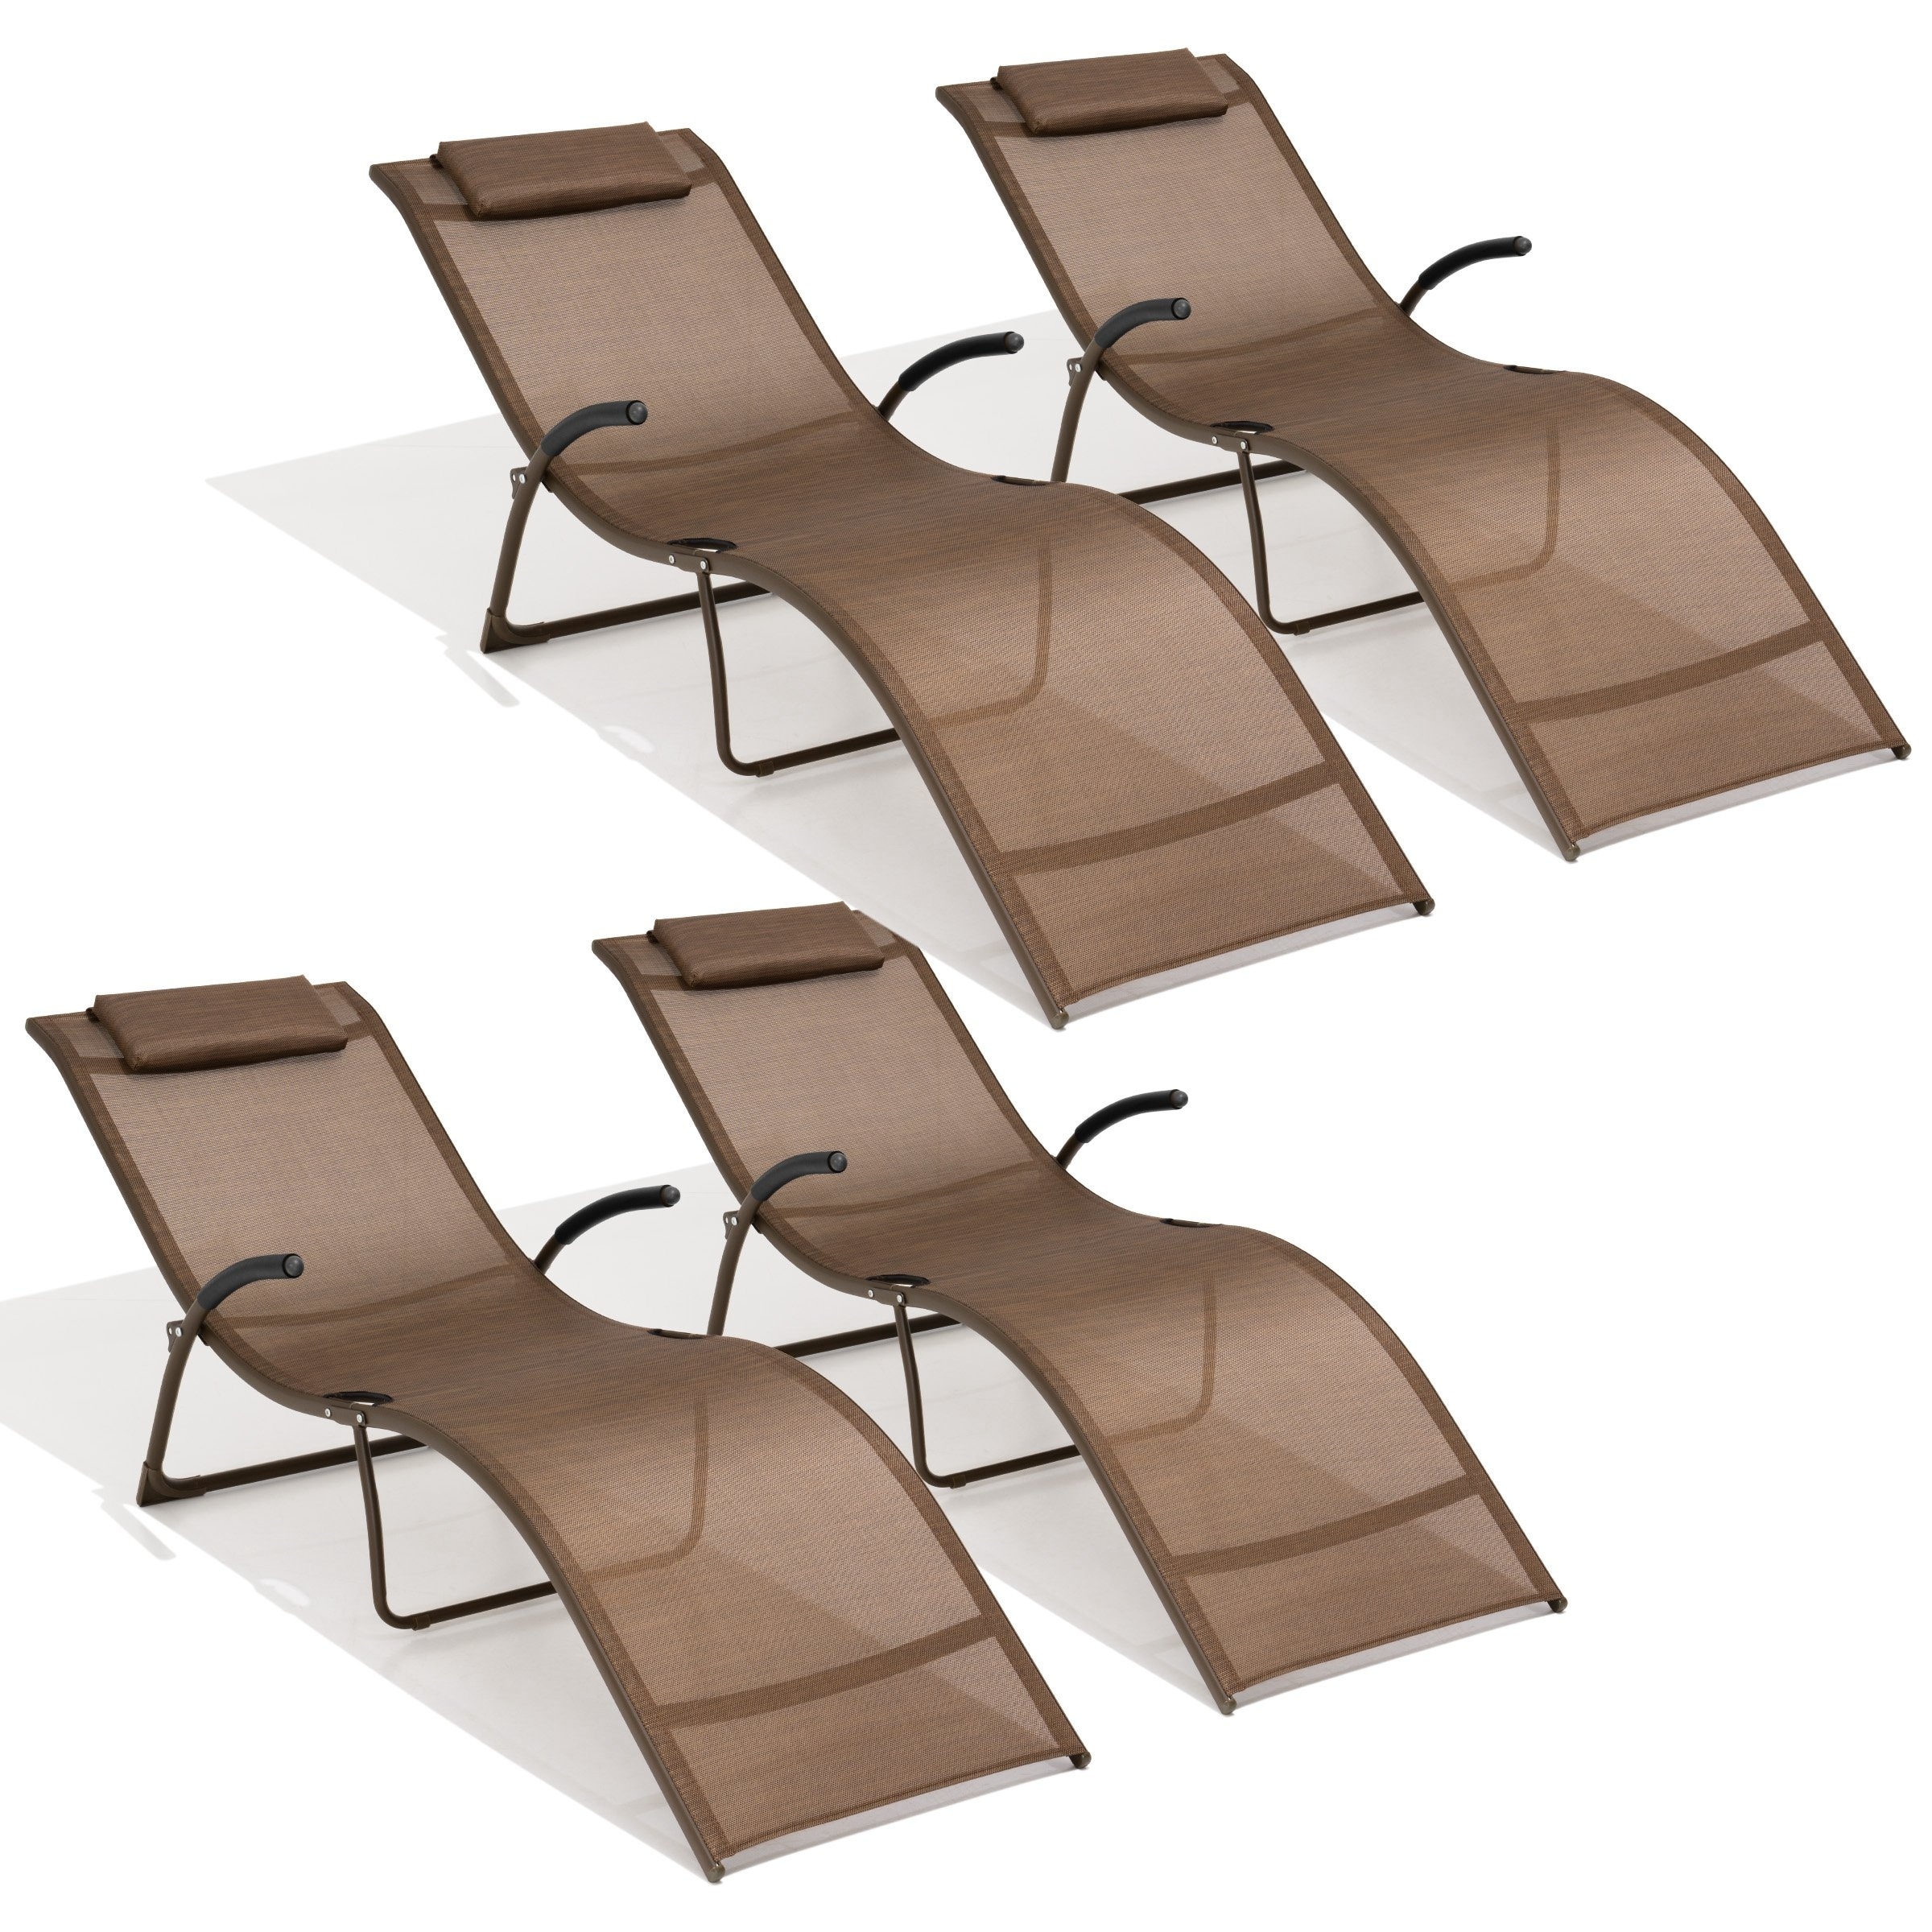 4-piece Outdoor Patio Portable Folding Reclining Chaise Lounge Chairs - 69.09 L * 24.61 W * 26 H